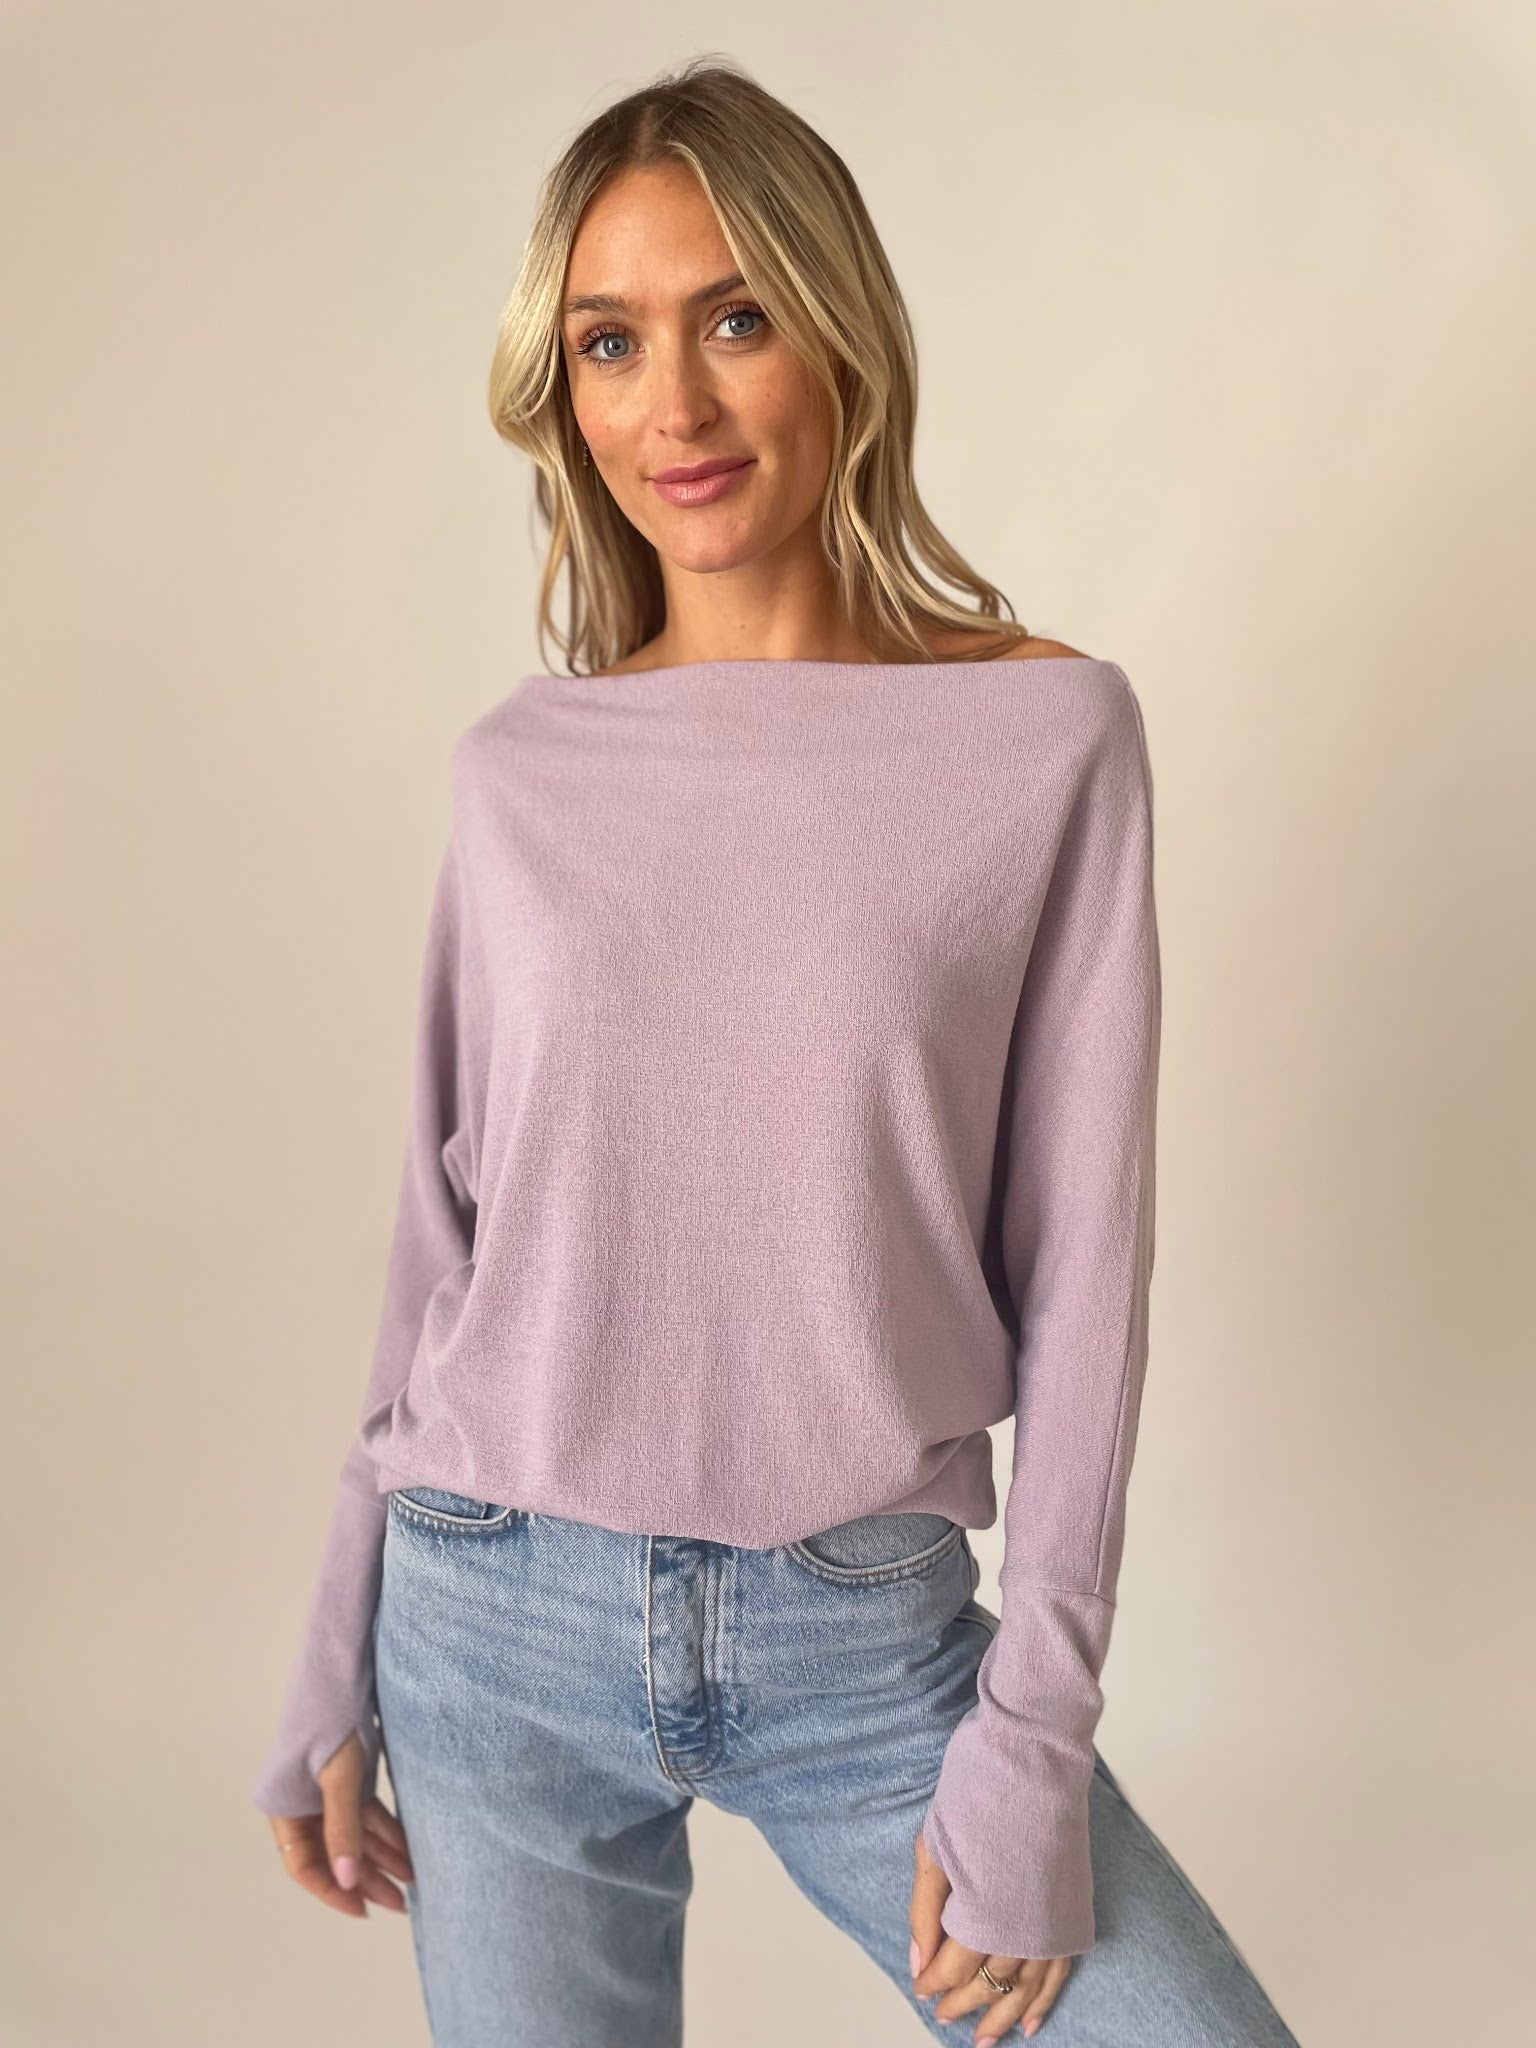 The Anywhere Top in Lavender